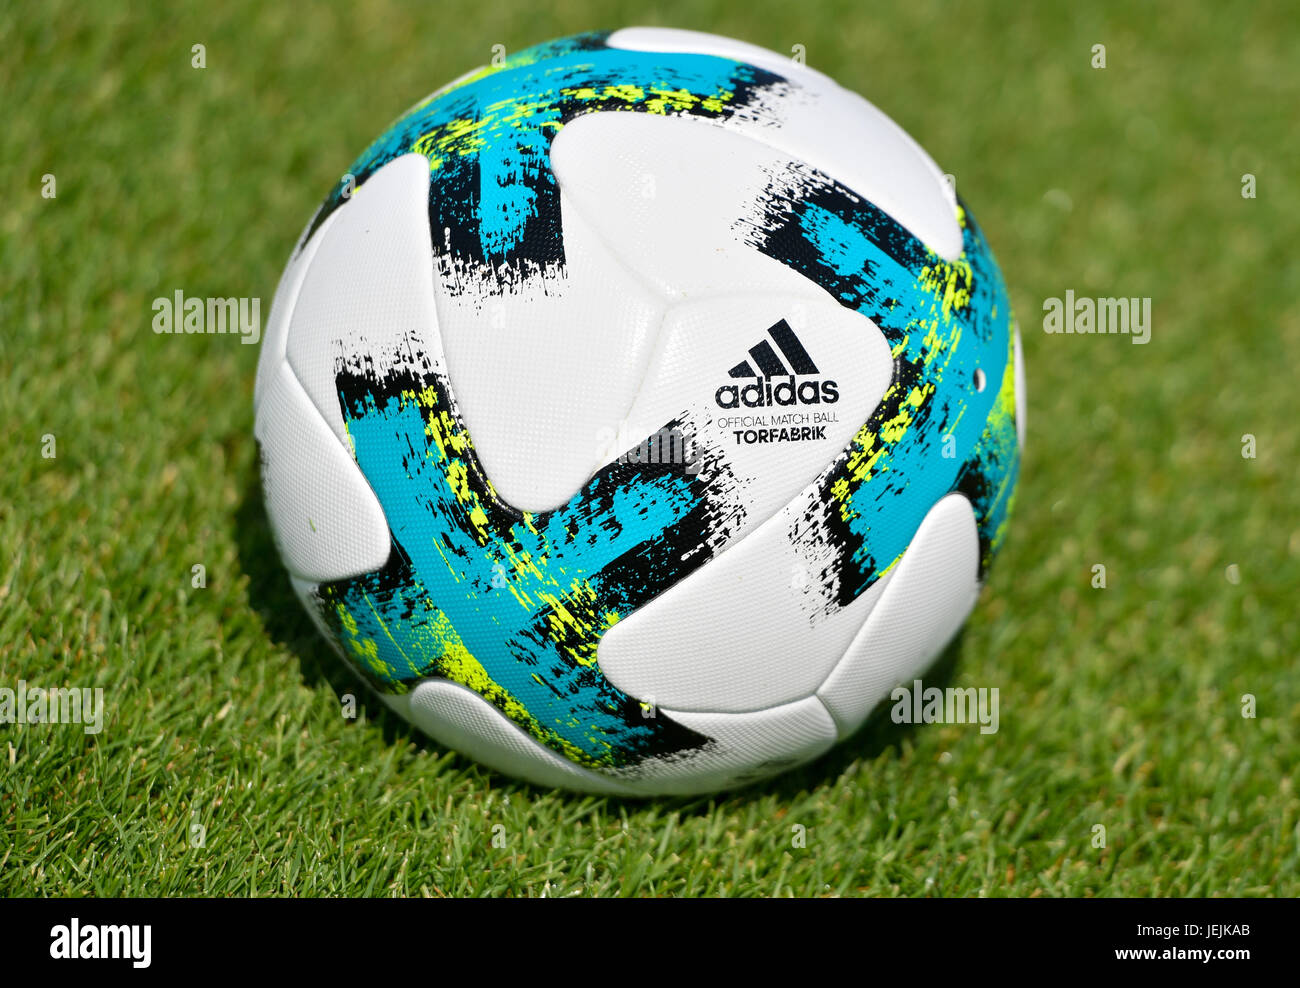 Darmstadt, Germany. 21st June, 2017. The official soccer ball "Torfabrik"  of the manufacturer Adidas for the Bundesliga Season 2017/2018 can be seen  during a training session of the SV Darmstadt 98 in